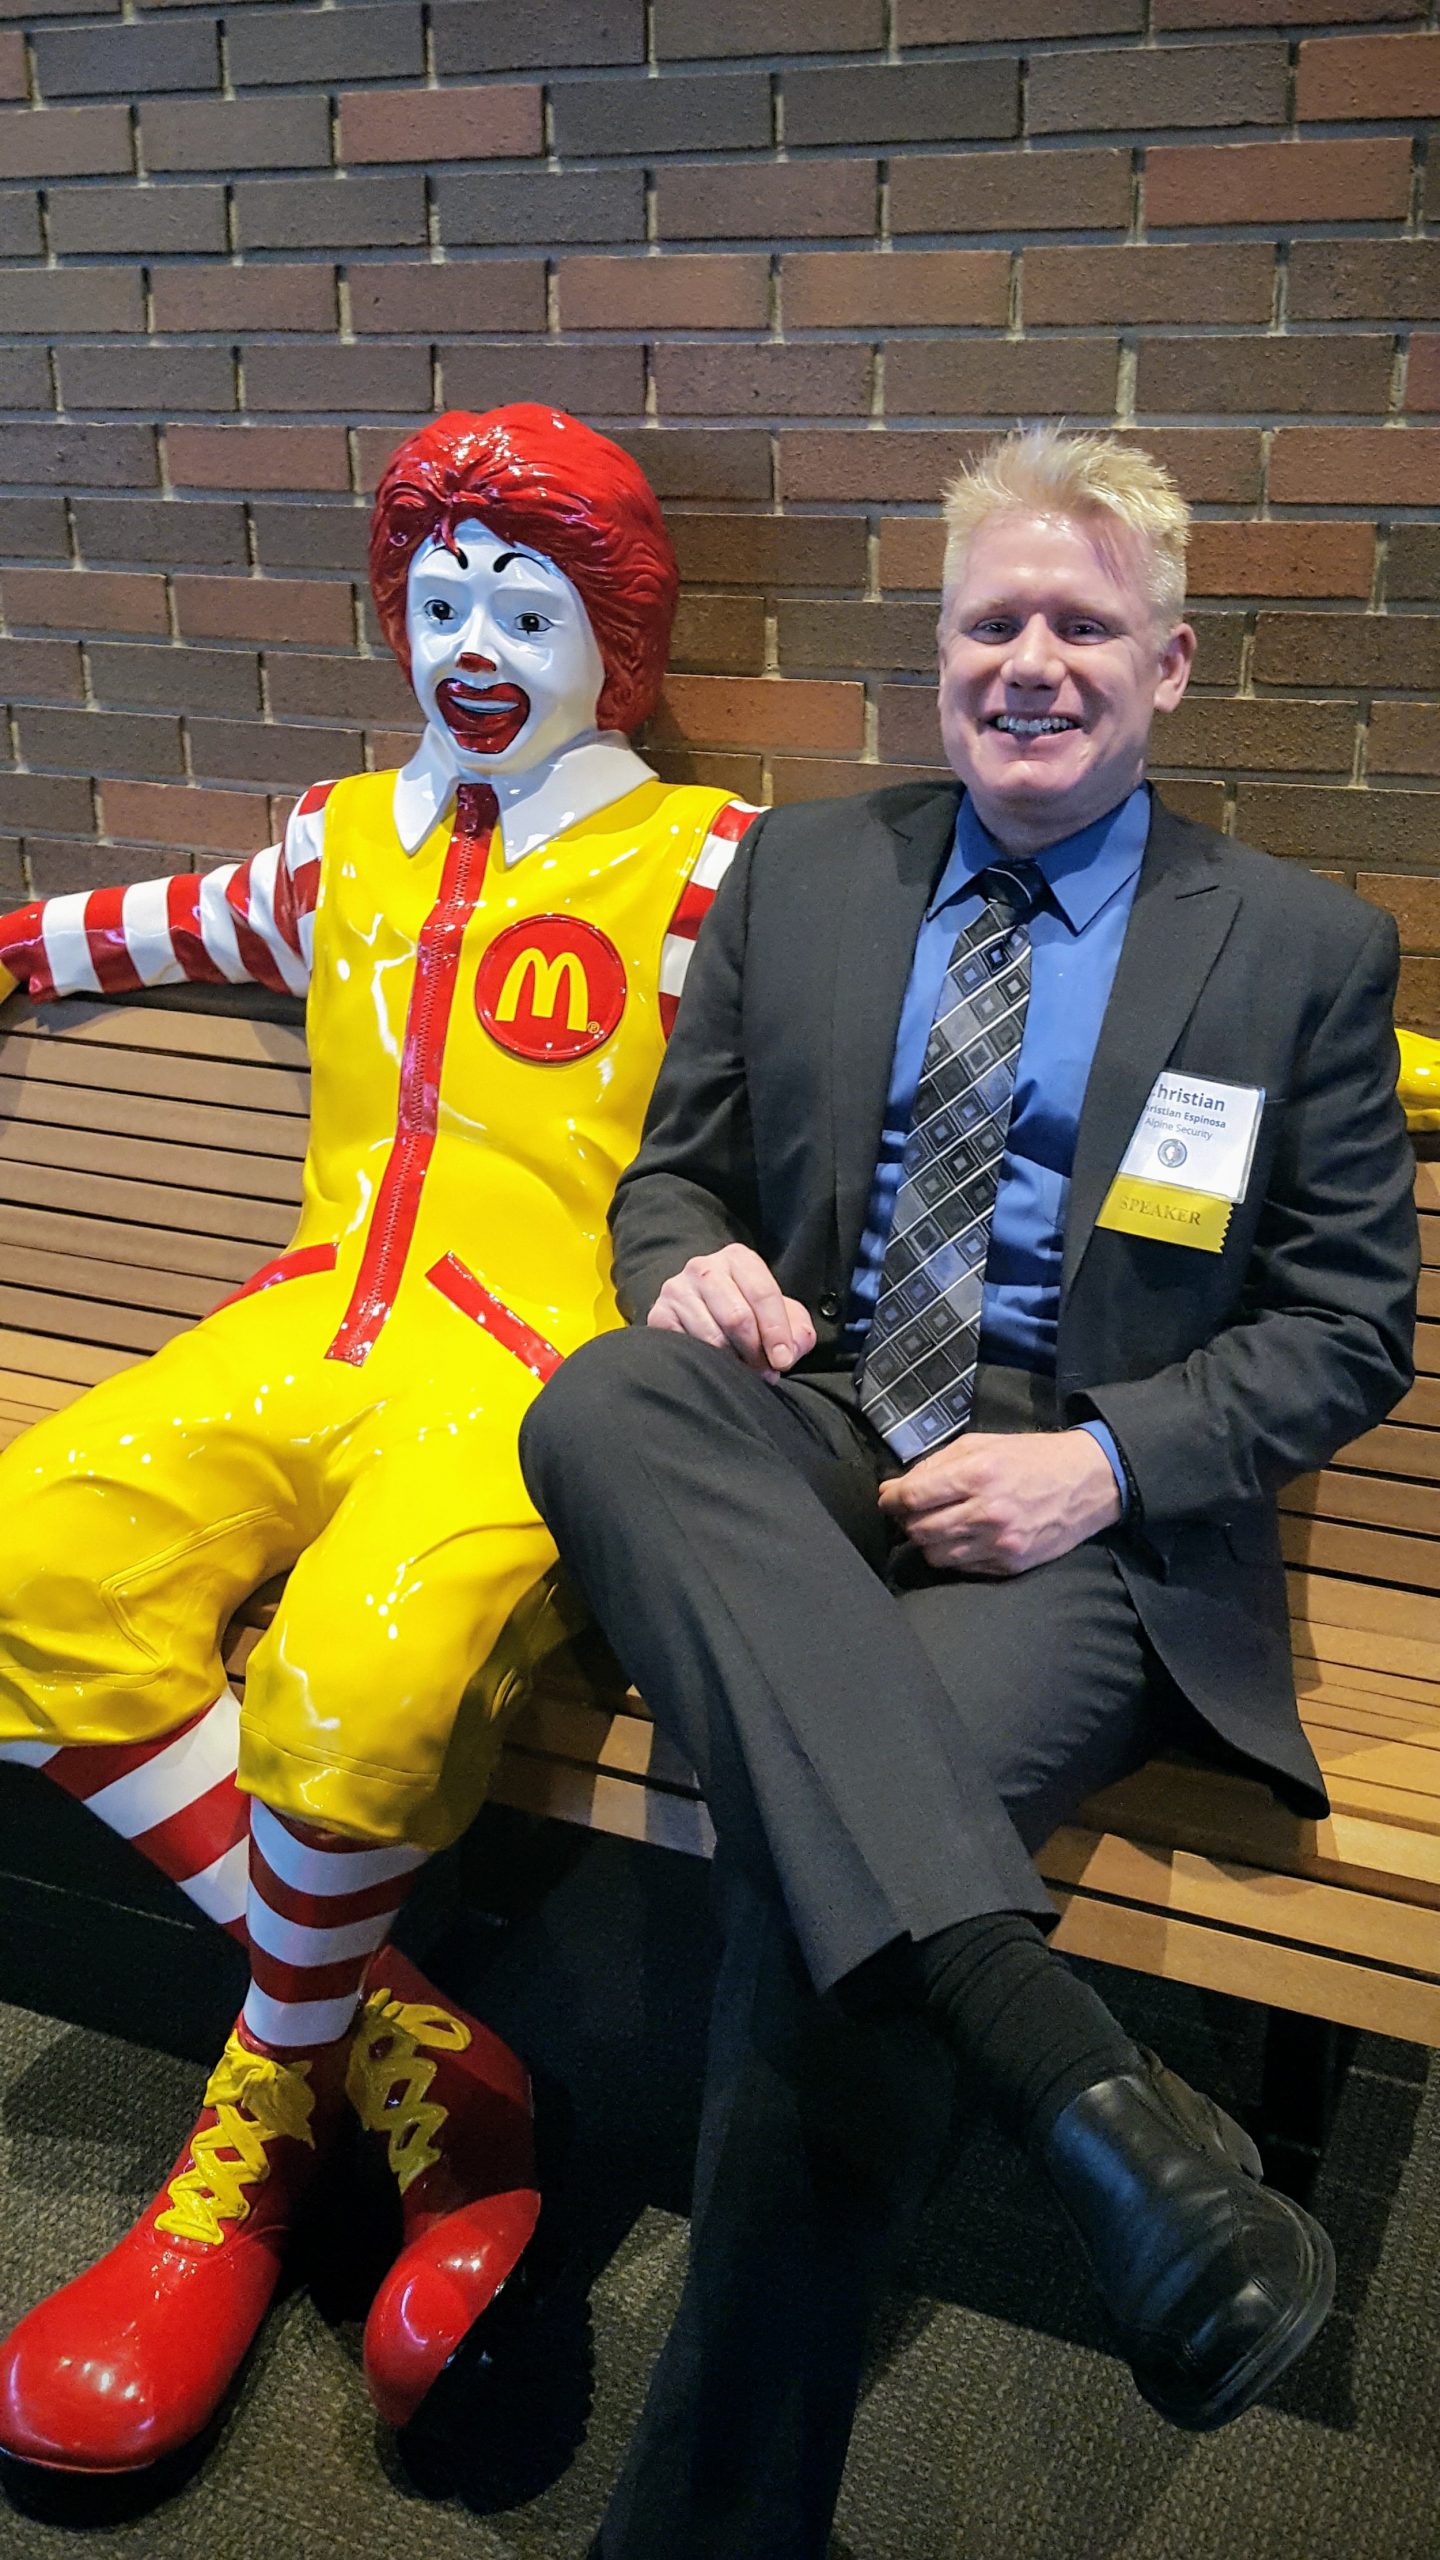  Christian, hanging out with Ronald, at Hamburger University during the Conference on Enterprise Excellence 